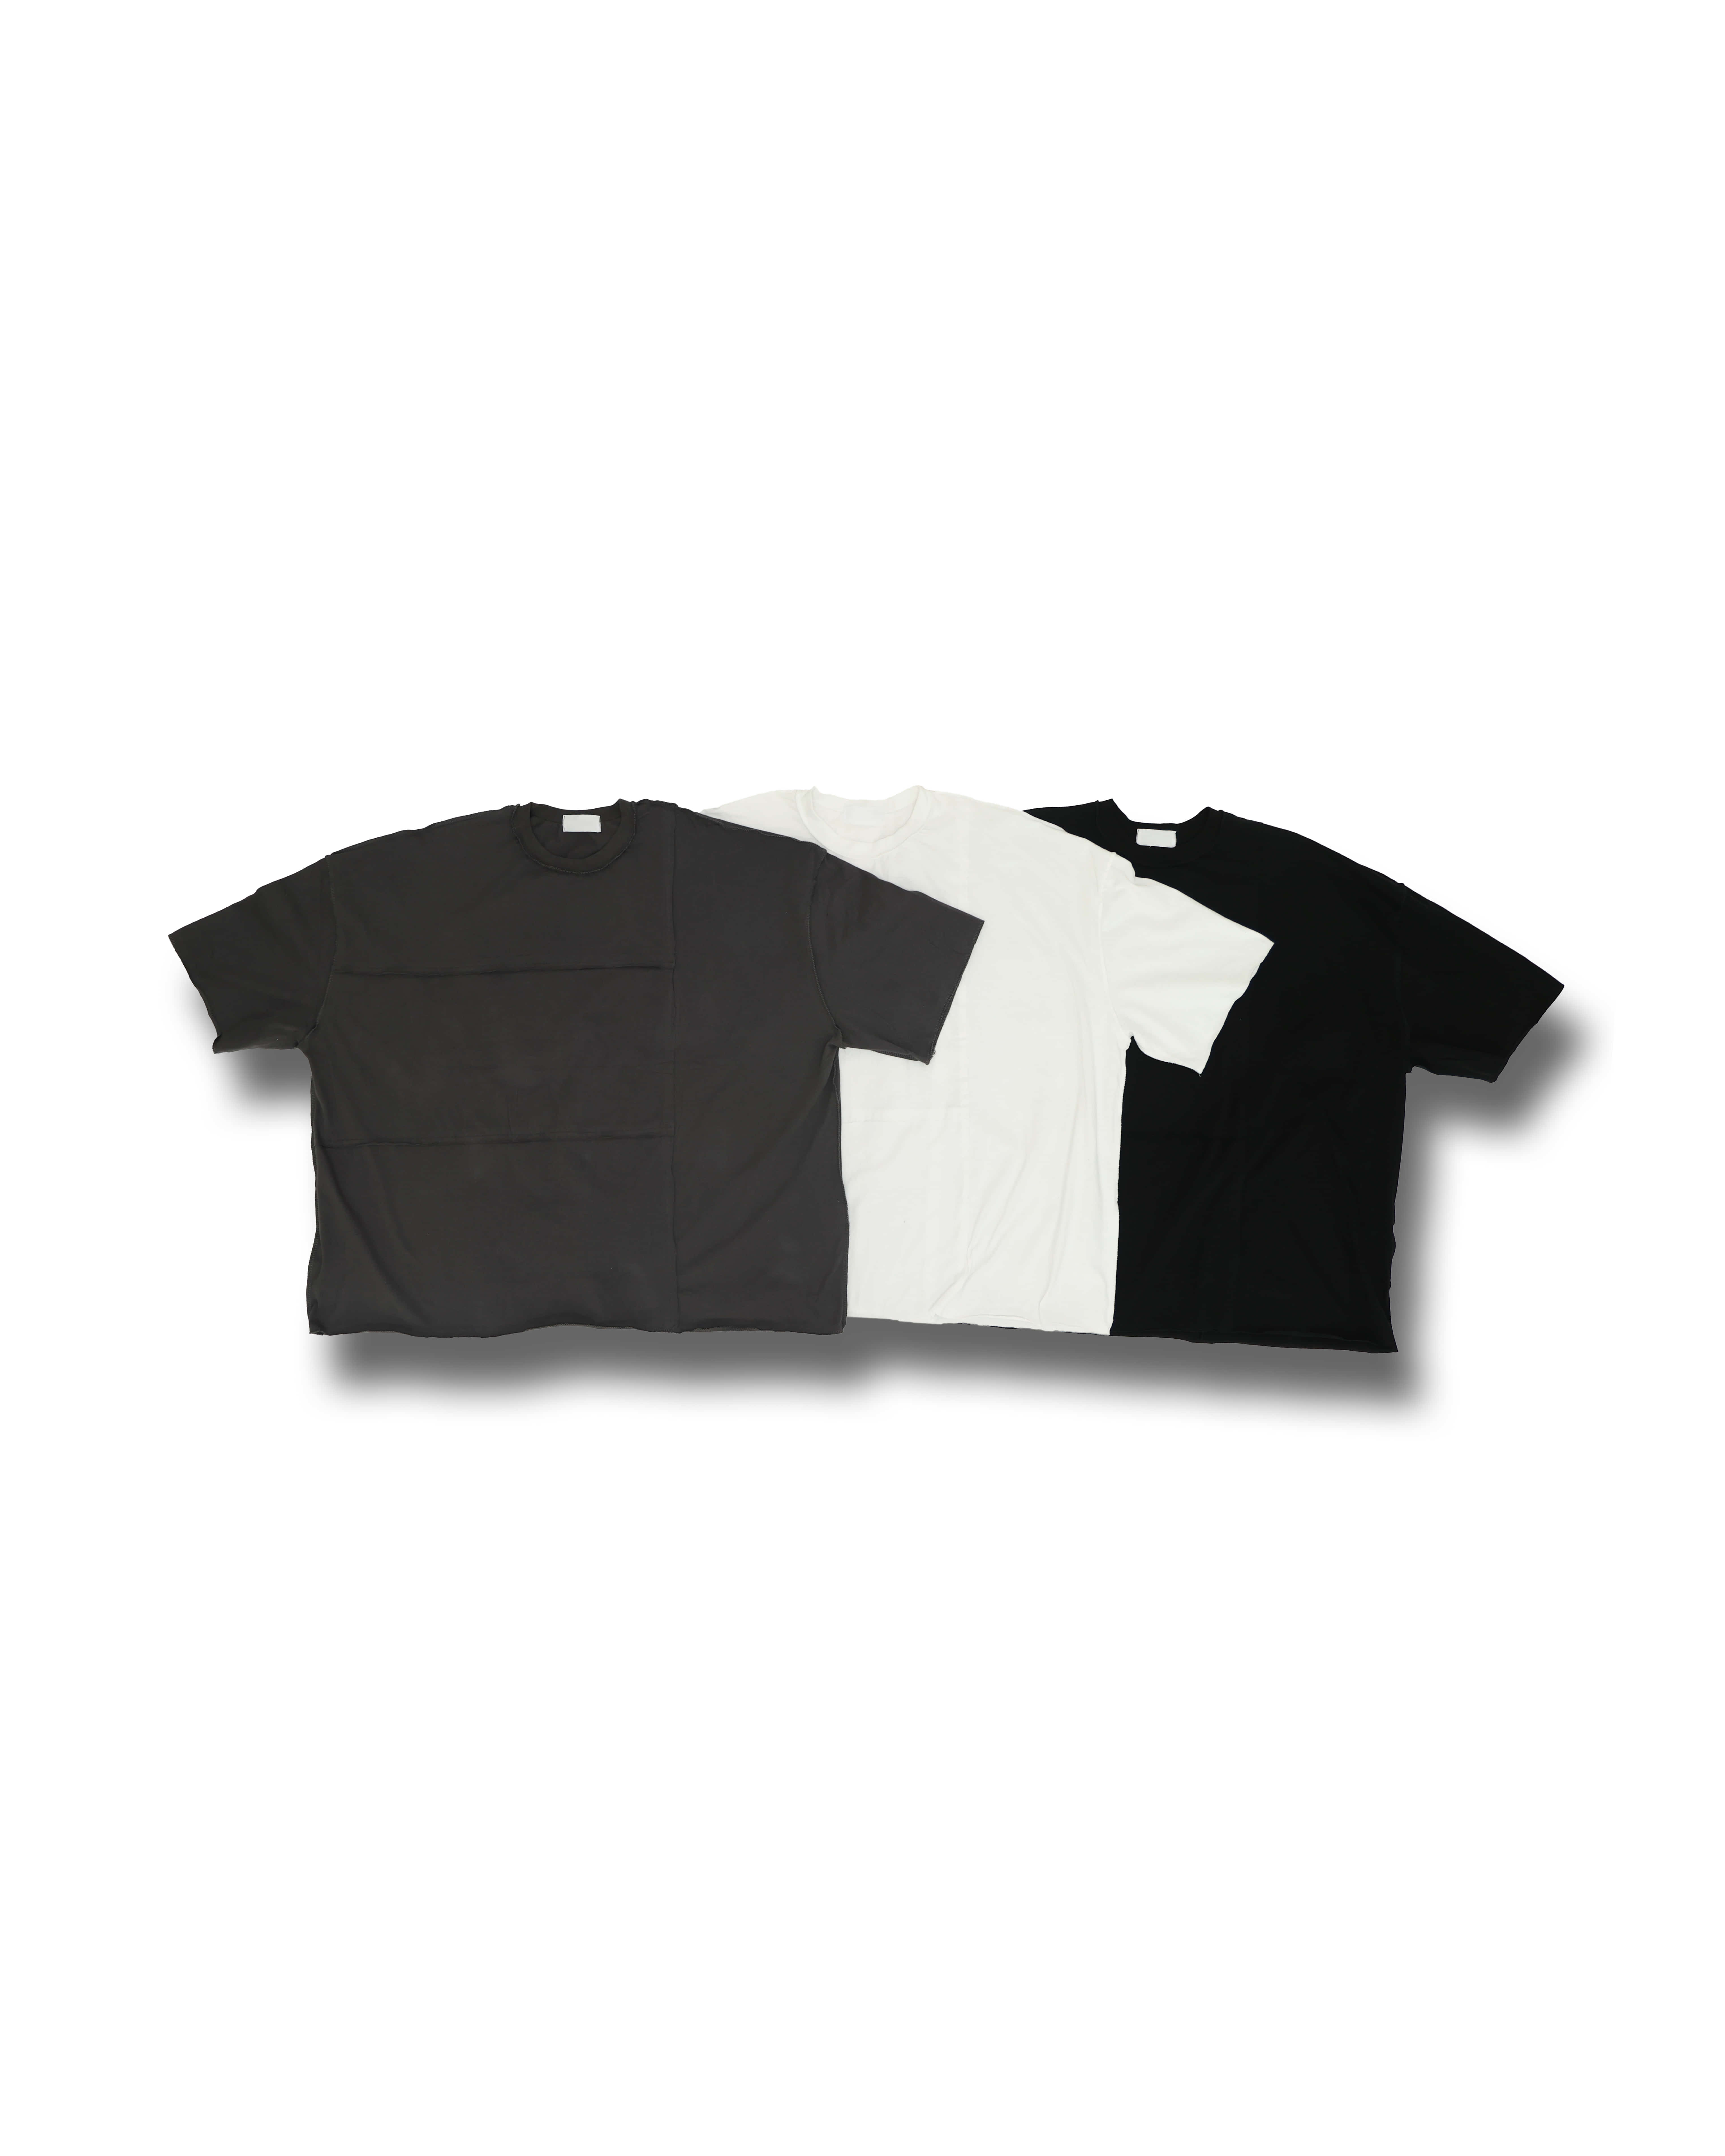 Horizon Parted Over T-Shirts (Black/Charcoal/White)